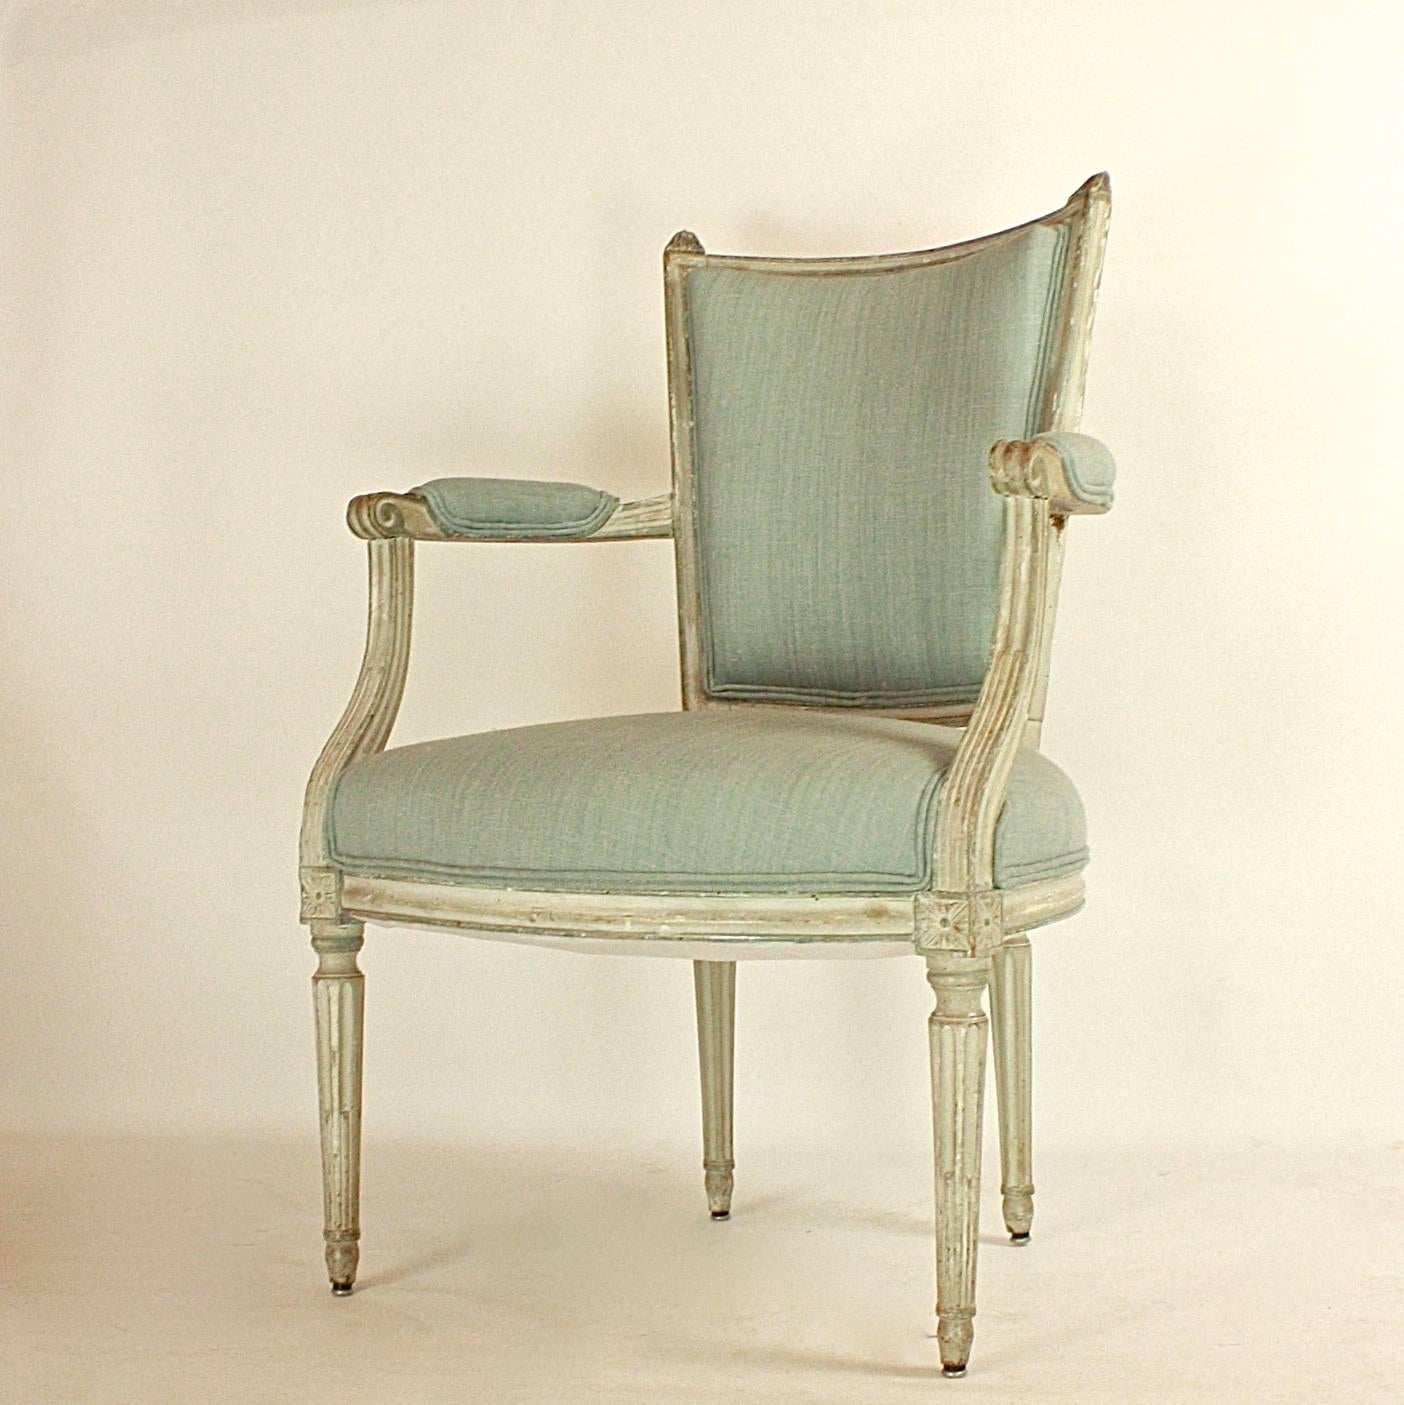 Pair of Louis XVI armchairs or fauteuils 'en cabriolet' in the manner of J.B.C. Sene.
The curved backrest with a straight top rail and pointed finials, the padded recessed armrests above four turned, tapering, fluted legs ending in toupee feet.